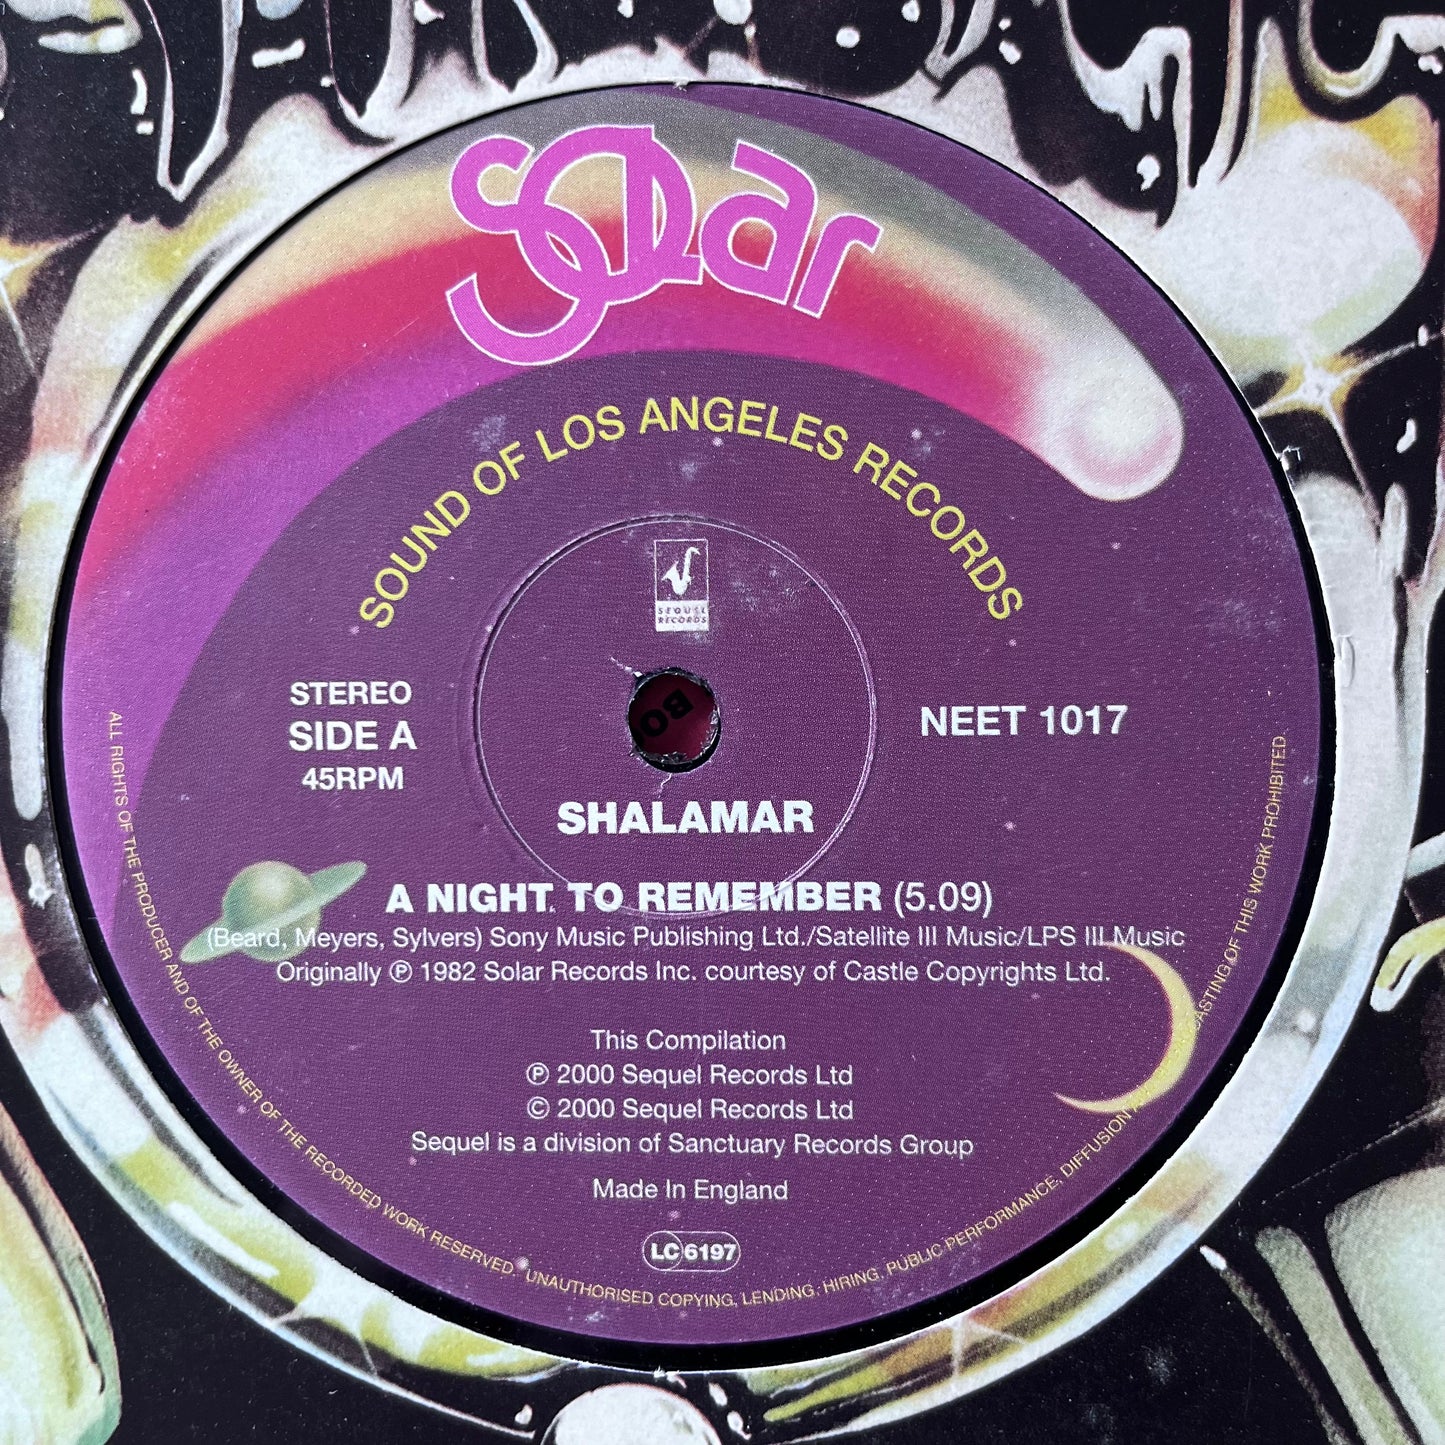 Shalamar “A Night To Remember” / “There It Is” 2 Track 12inch Vinyl Record